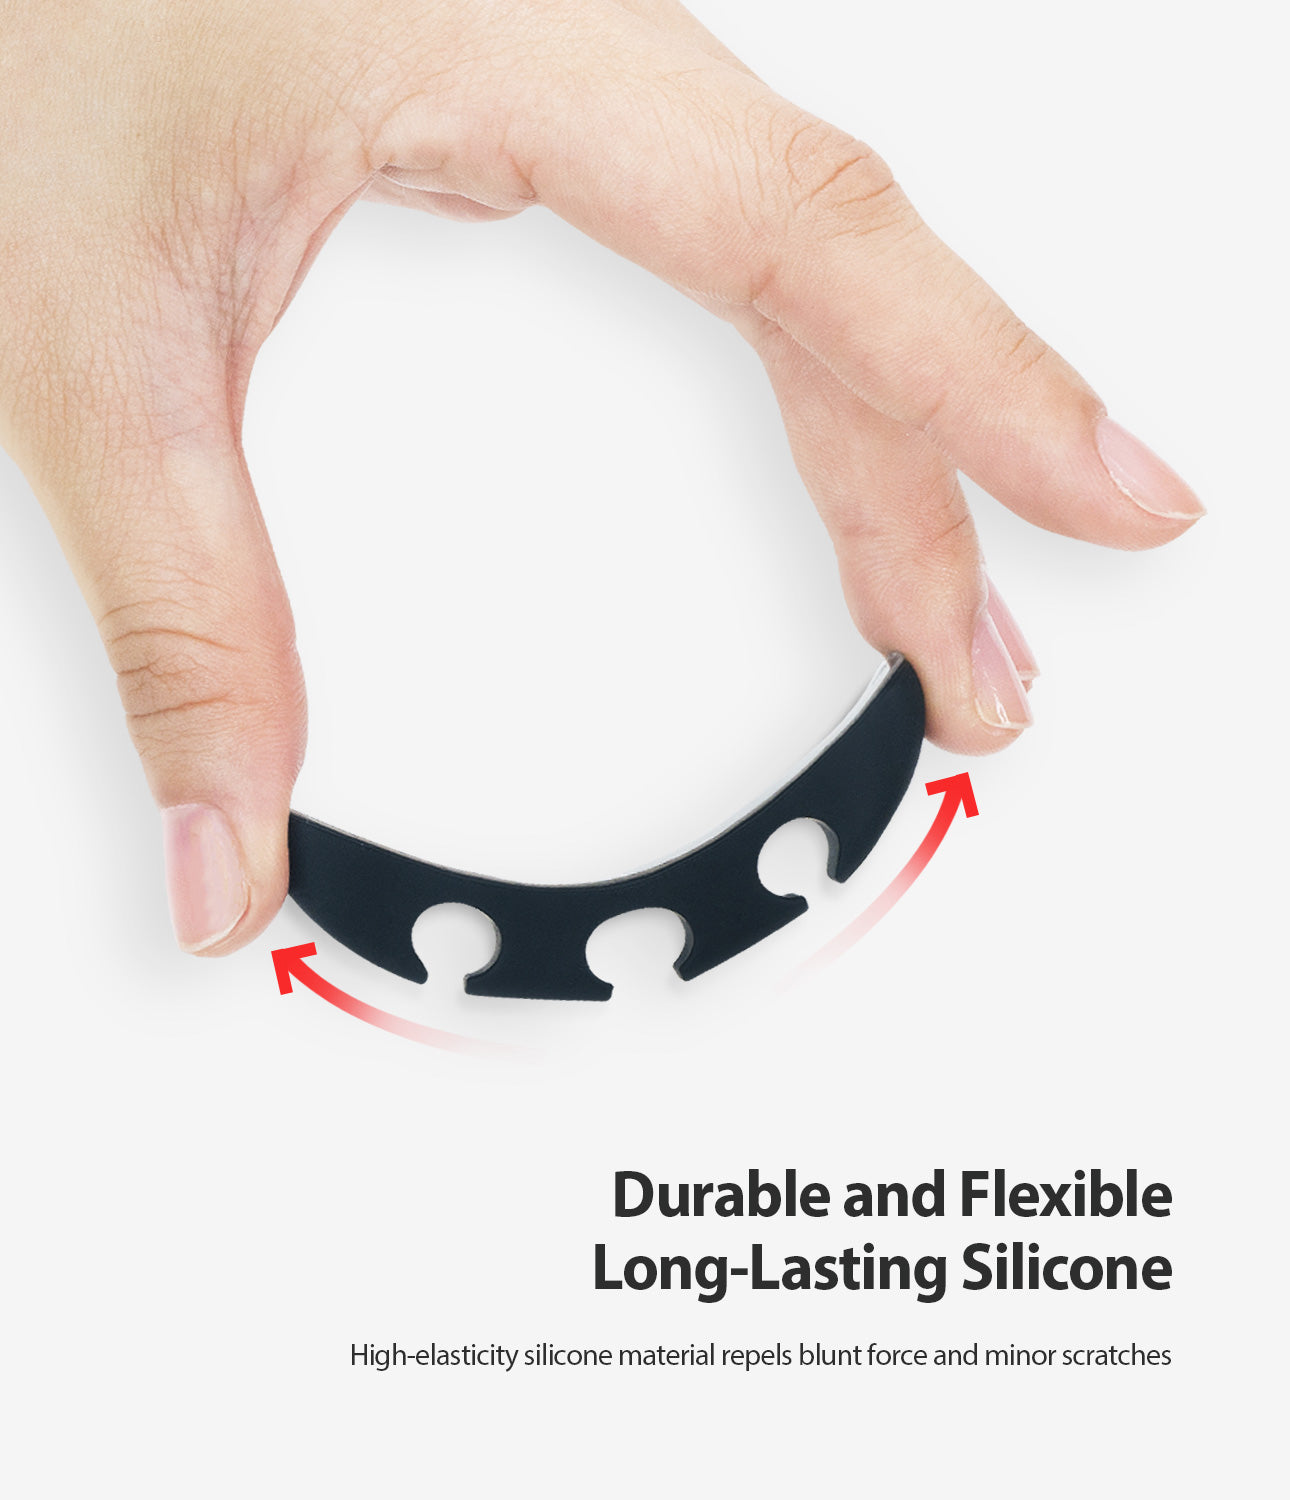 durable and flexible long lasting silicone